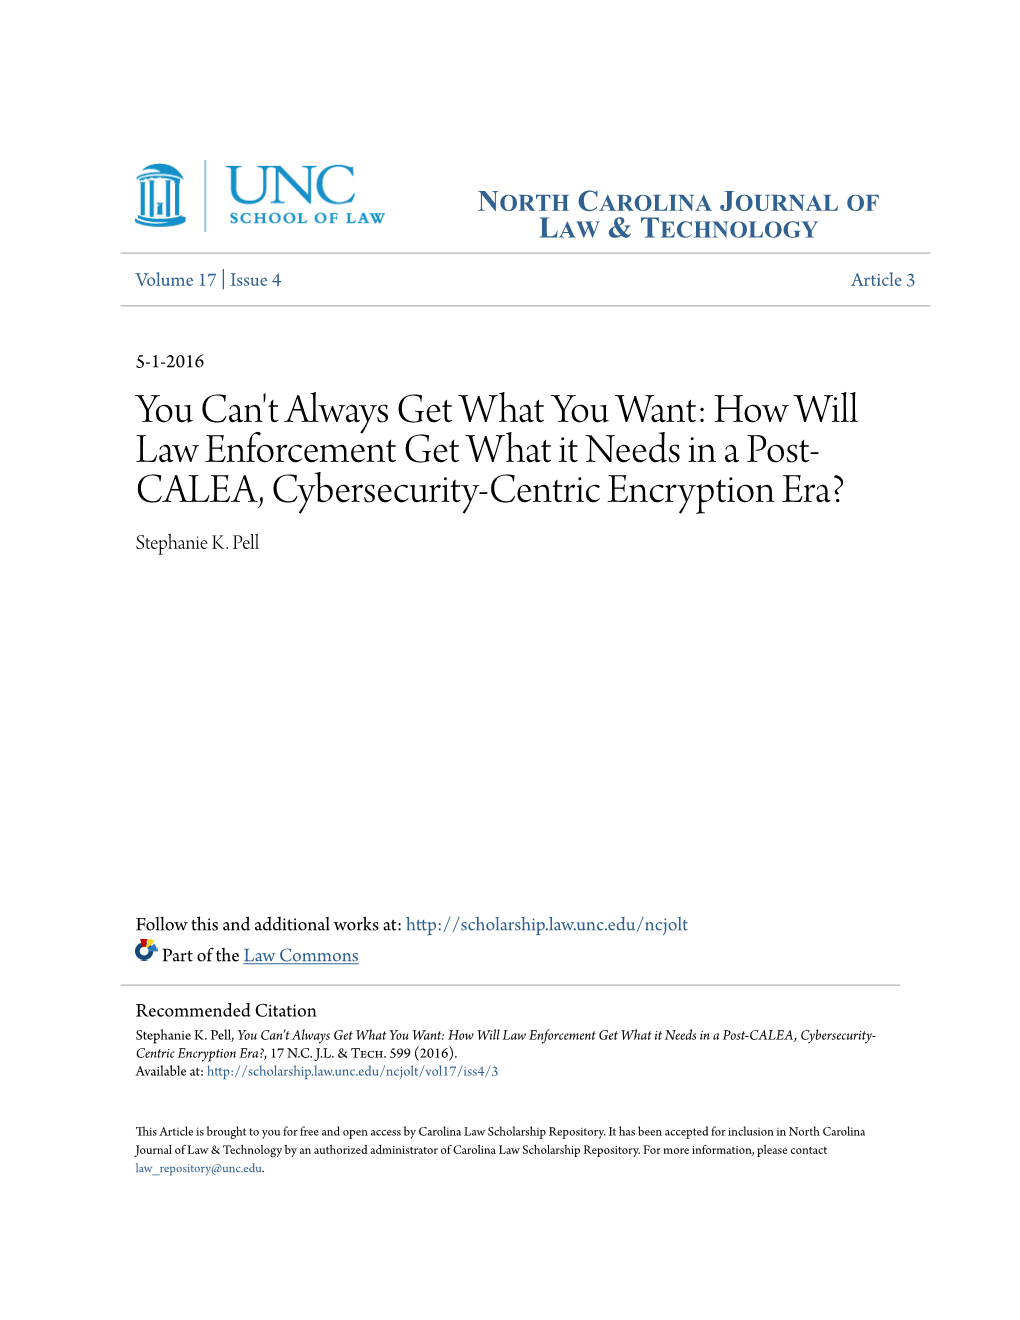 You Can't Always Get What You Want: How Will Law Enforcement Get What It Needs in a Post- CALEA, Cybersecurity-Centric Encryption Era? Stephanie K